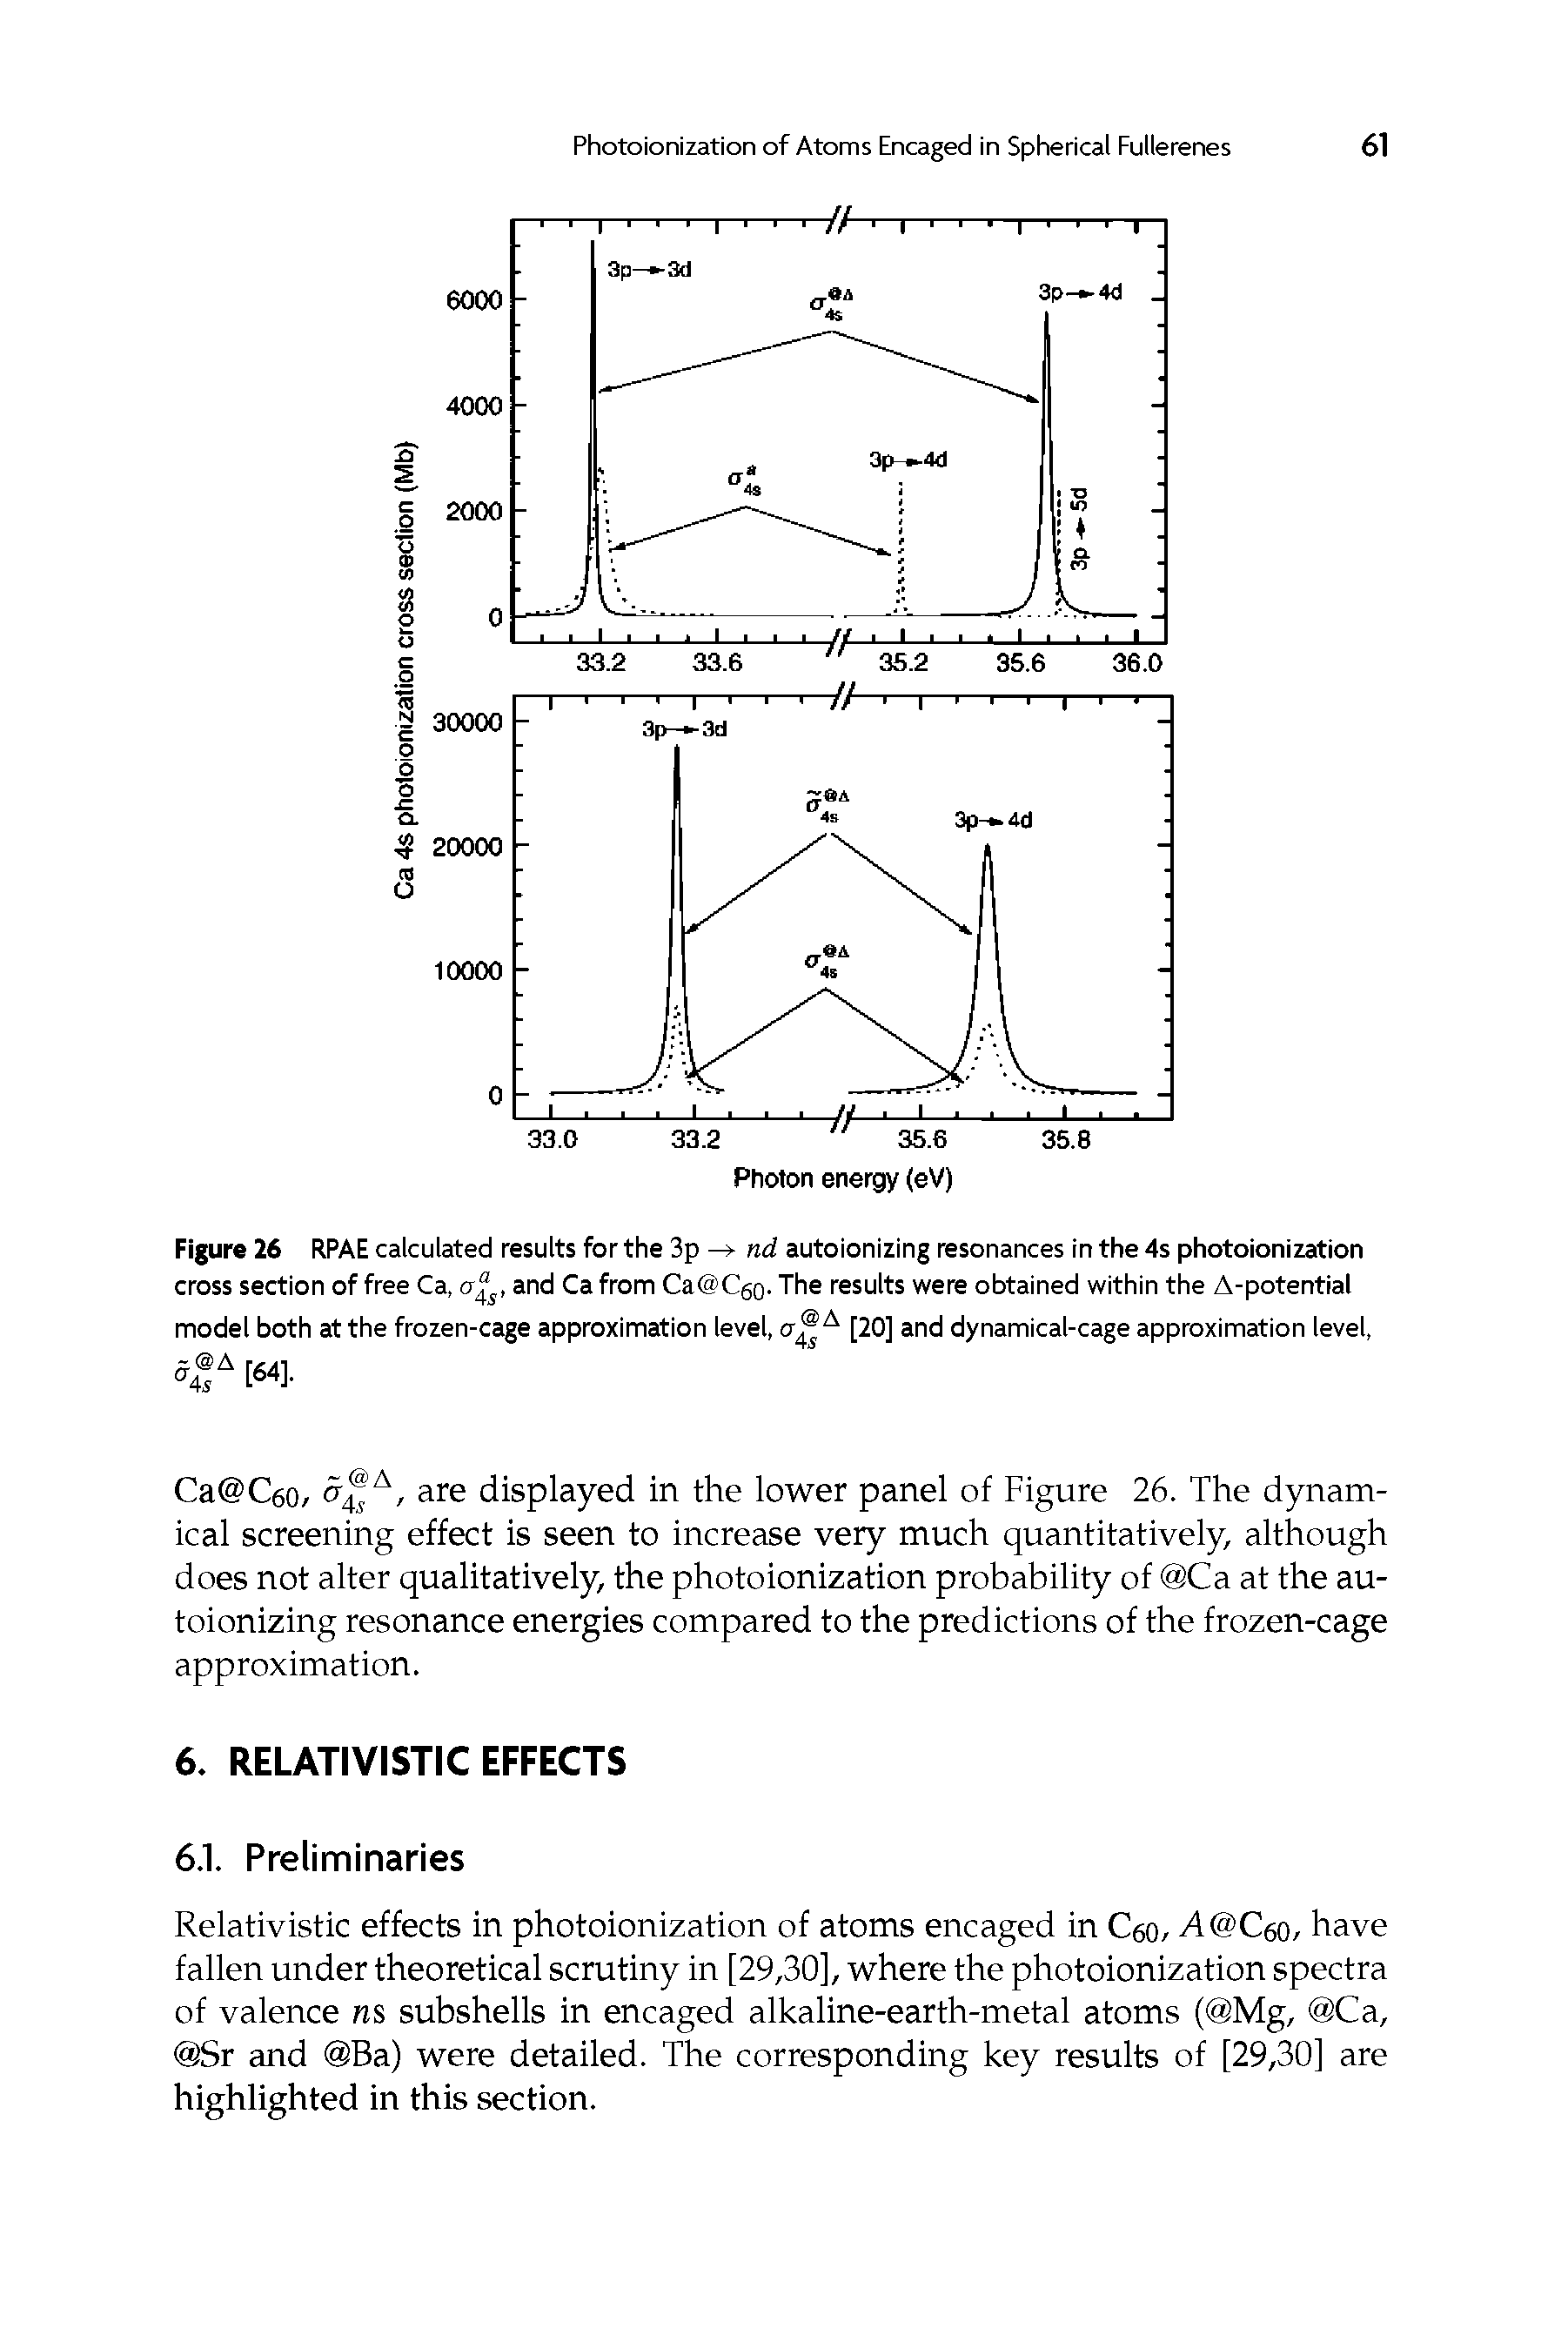 Figure 26 RPAE calculated results for the 3p nd autoionizing resonances in the 4s photoionization cross section of free Ca,, and Ca from Ca Cgo. The results were obtained within the A-potential model both at the frozen-cage approximation level, a A [20] and dynamical-cage approximation level,...